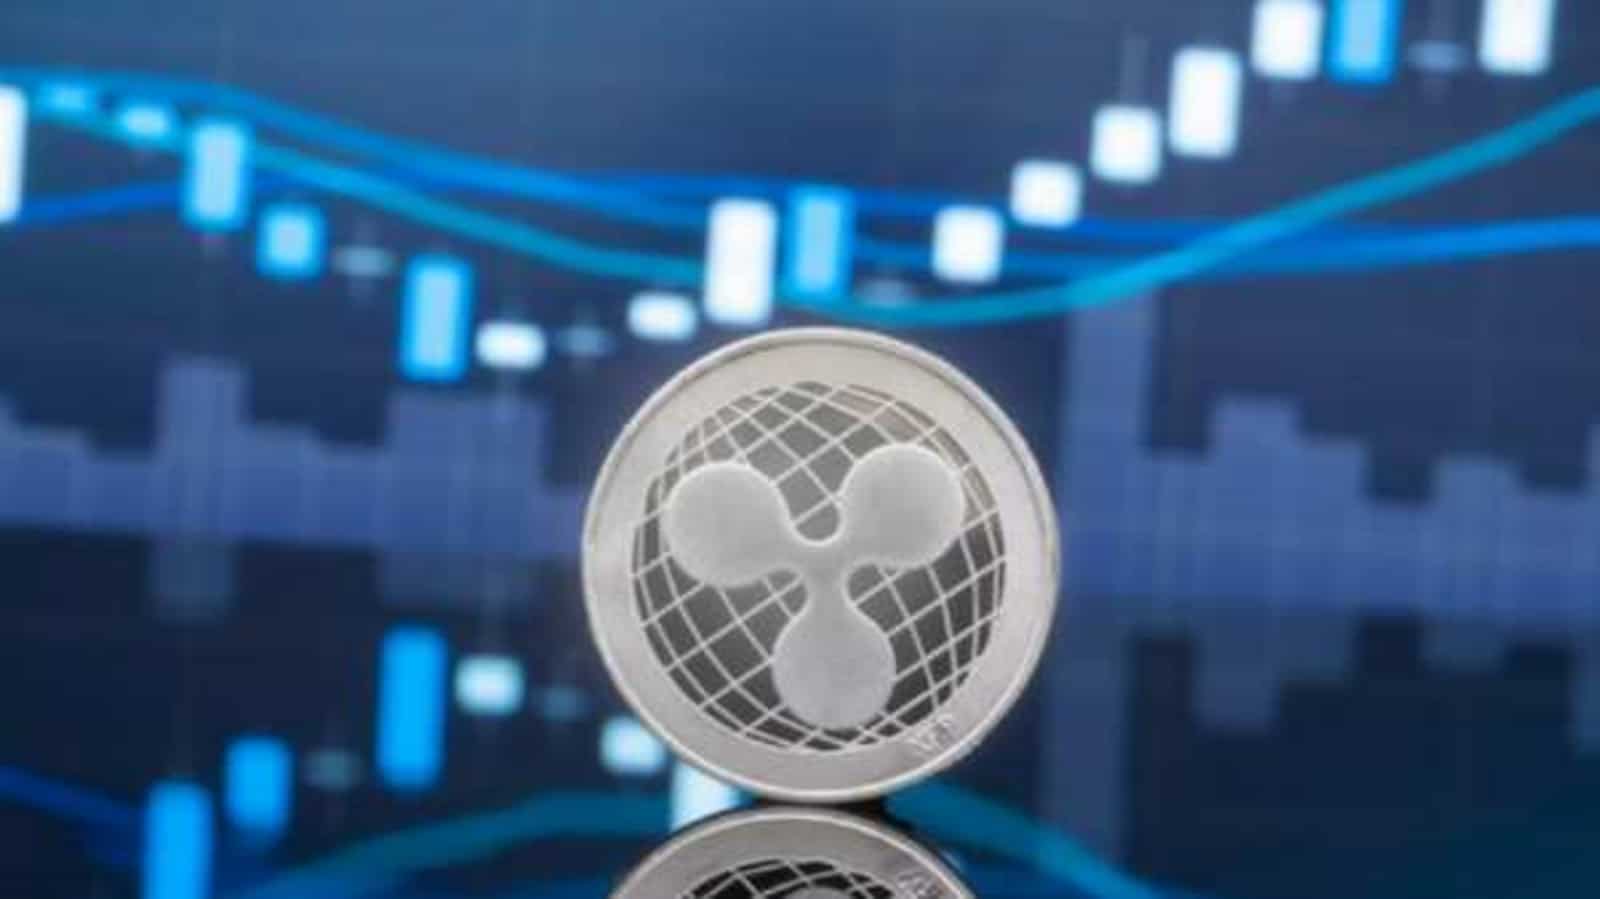 XRP Price Hits Target Of $0.5, But Can It Break This Key Resistance?